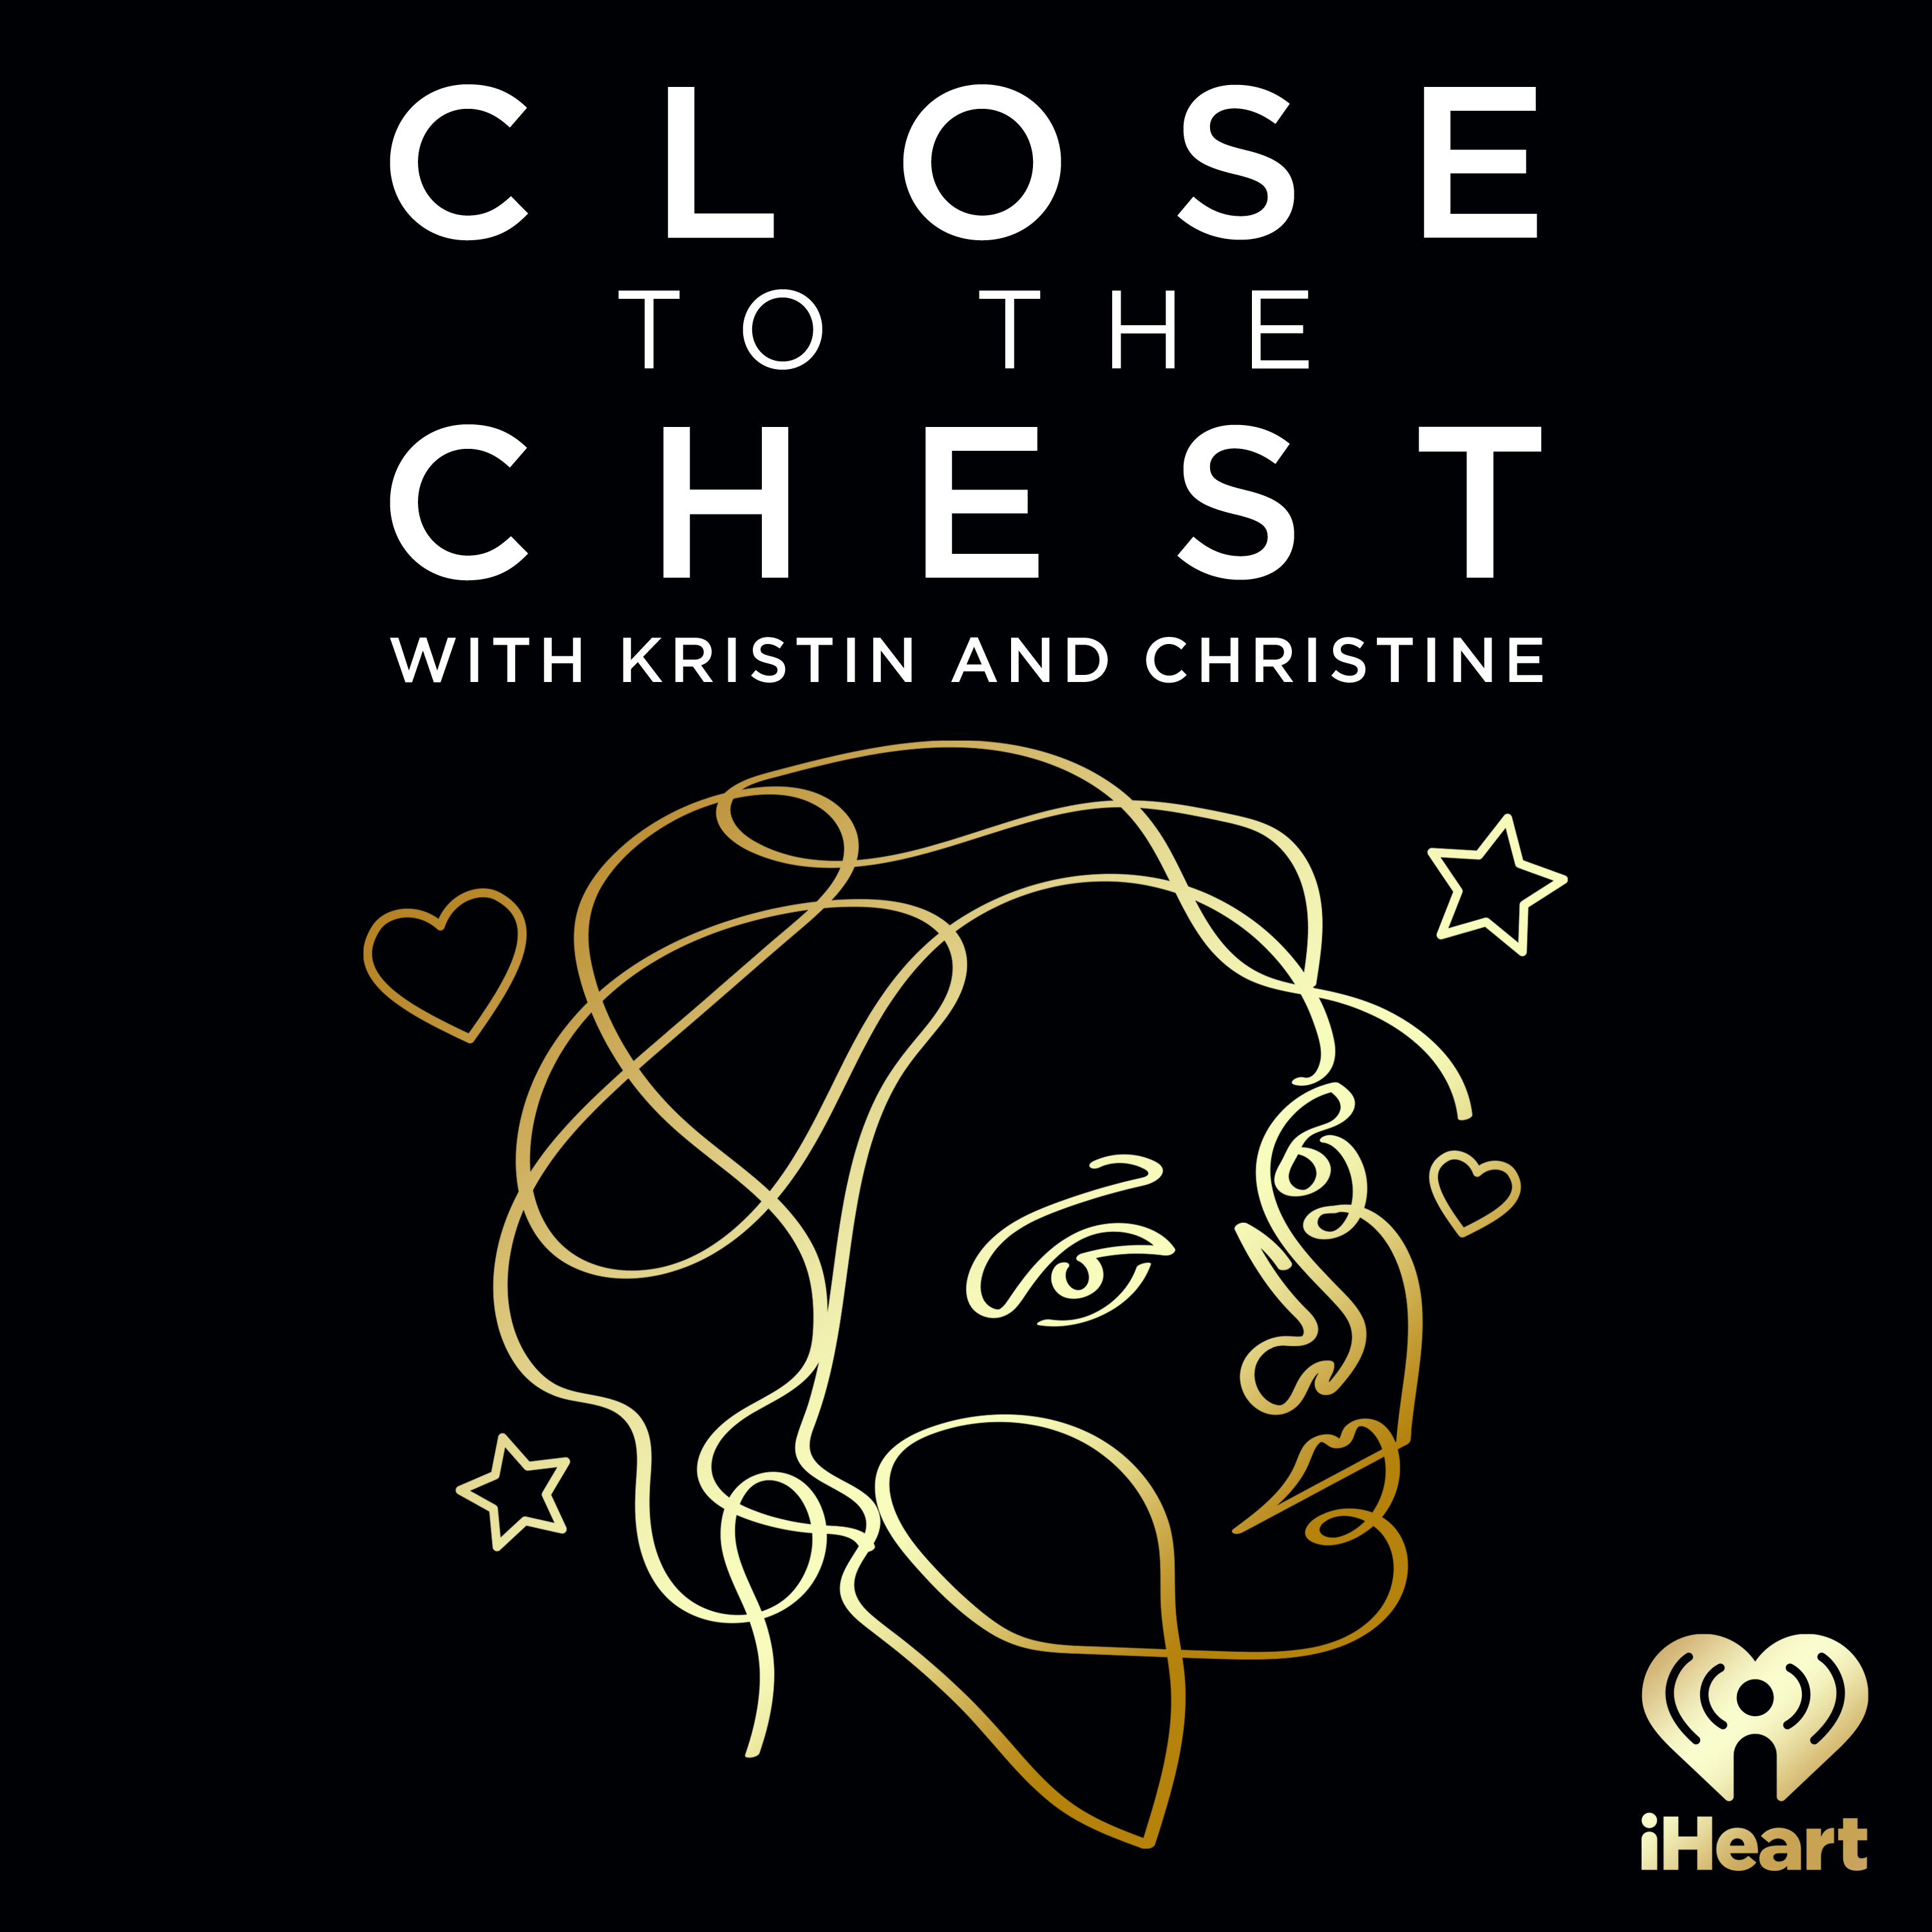 Introducing Close to the Chest with Kristin and Christine